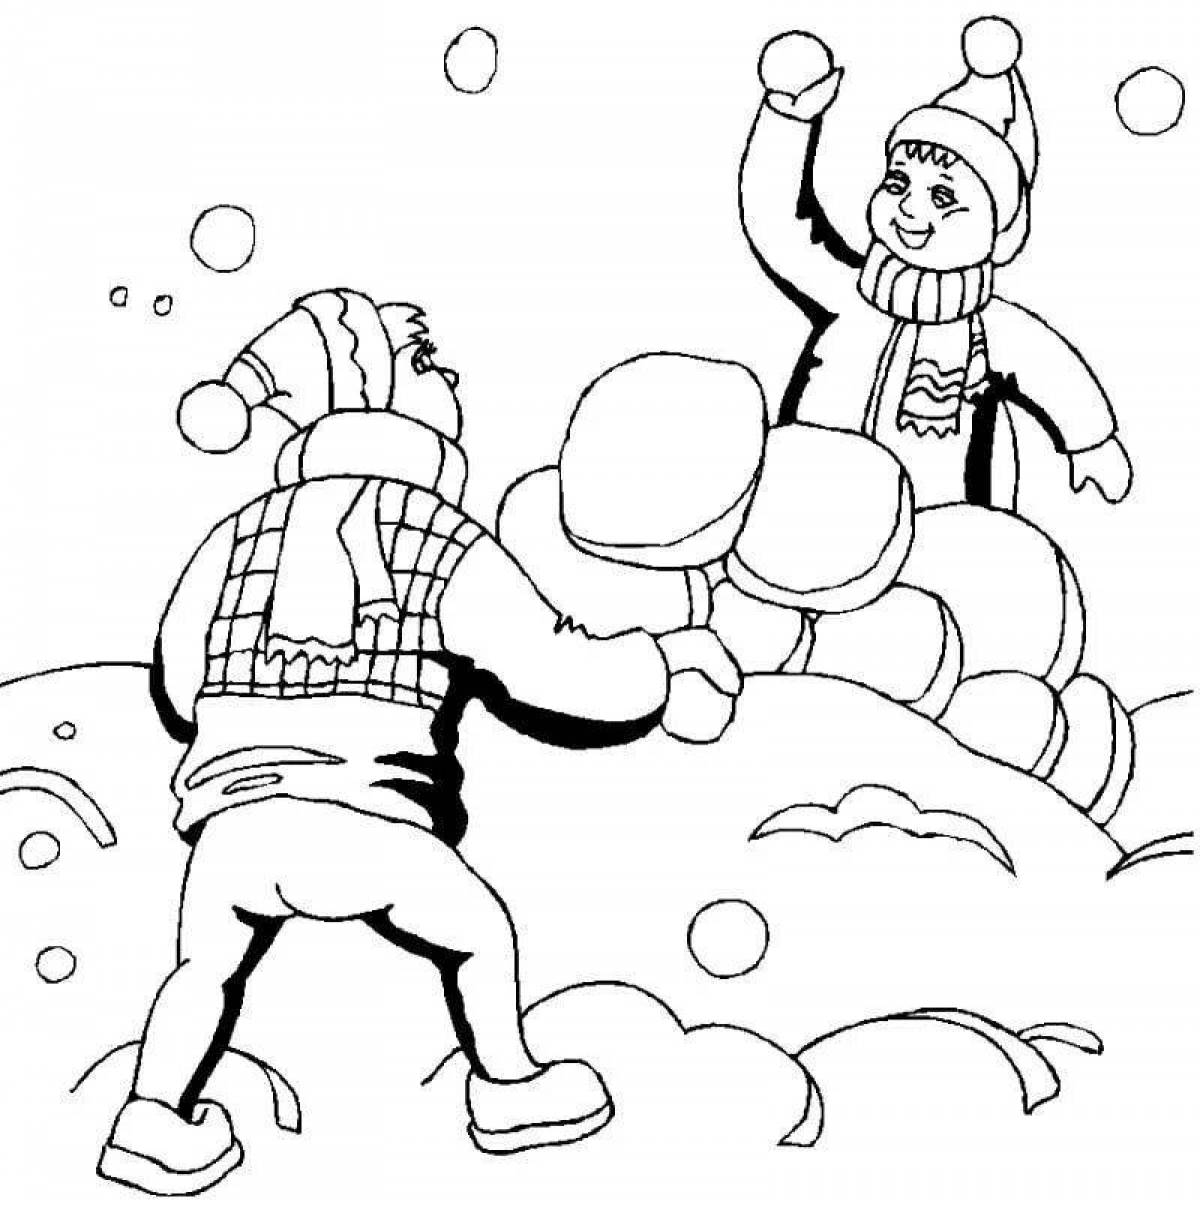 Coloring book funny kids playing snowballs